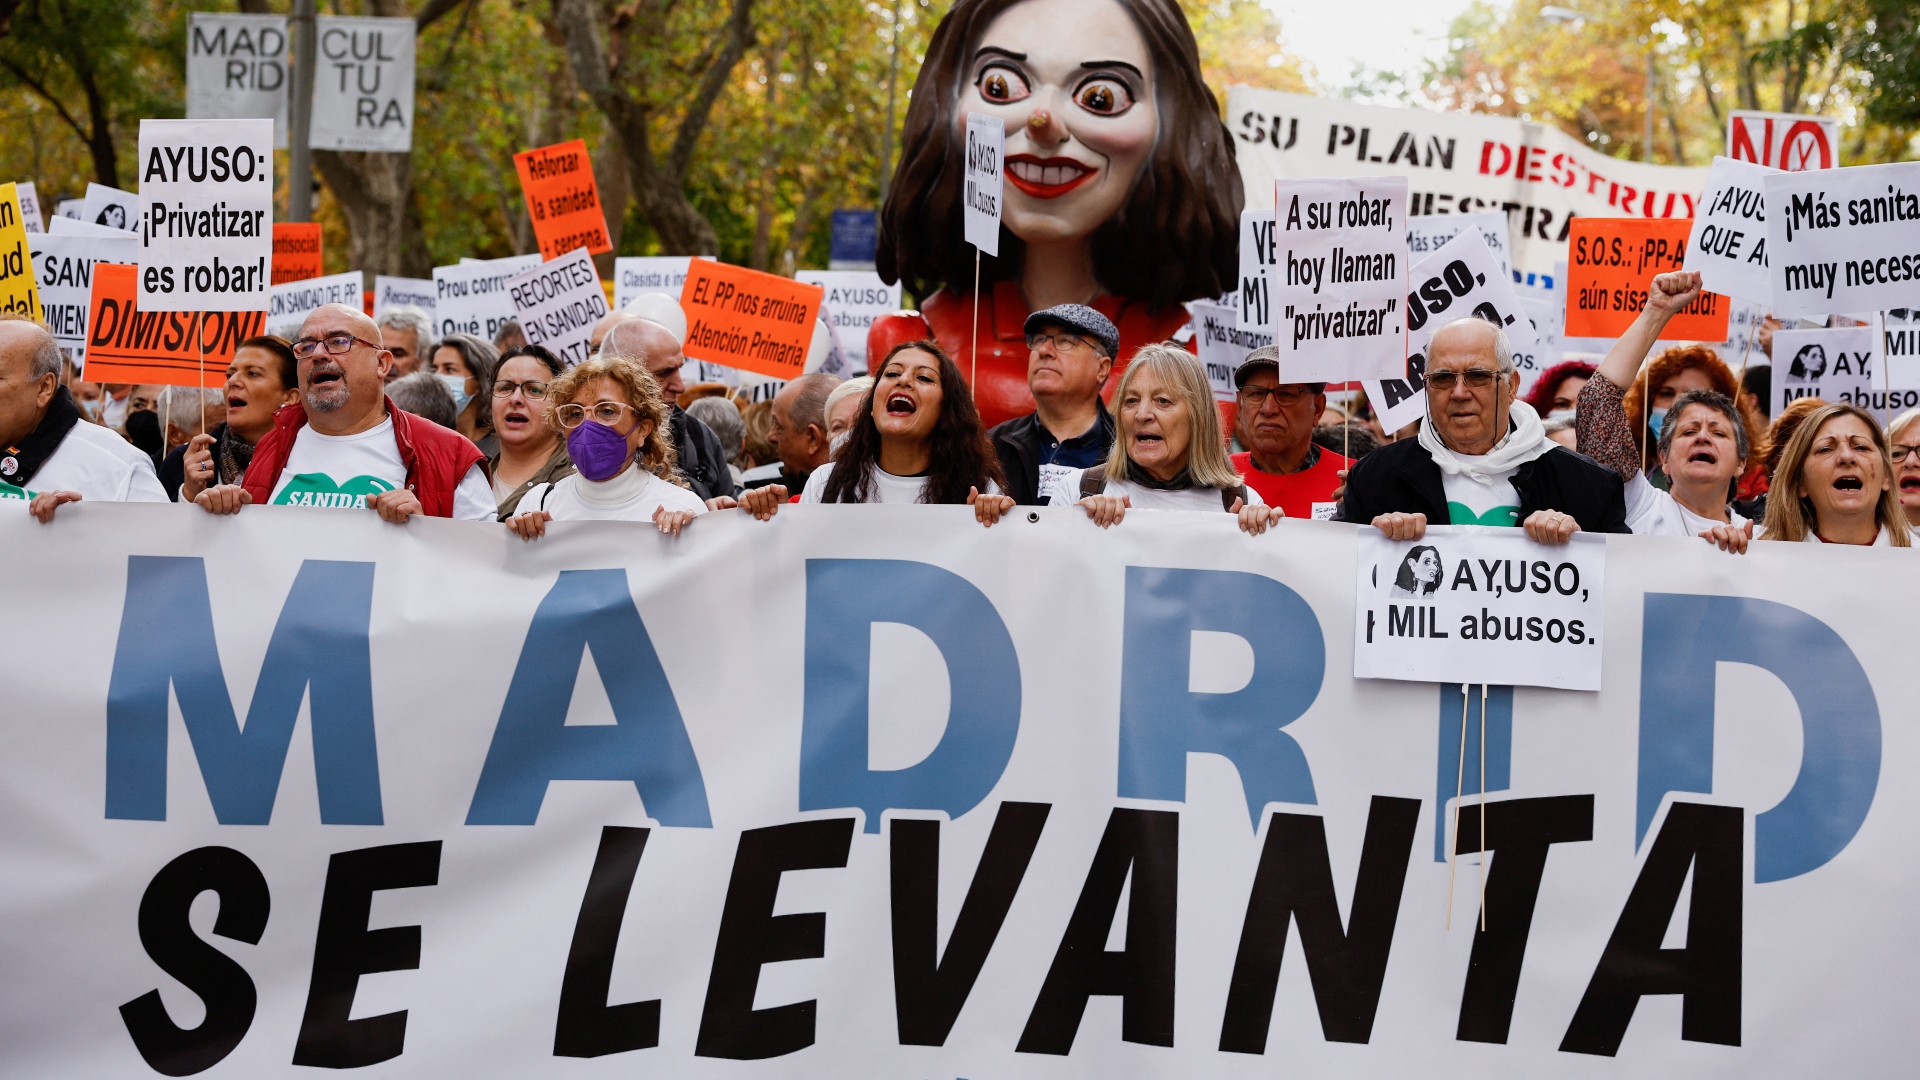 Protestors marched behind a banner that reads 'Madrid rises' and held a puppett depicting Madrid regional president Isabel Diaz Ayuso./Susana Vera/Reuters